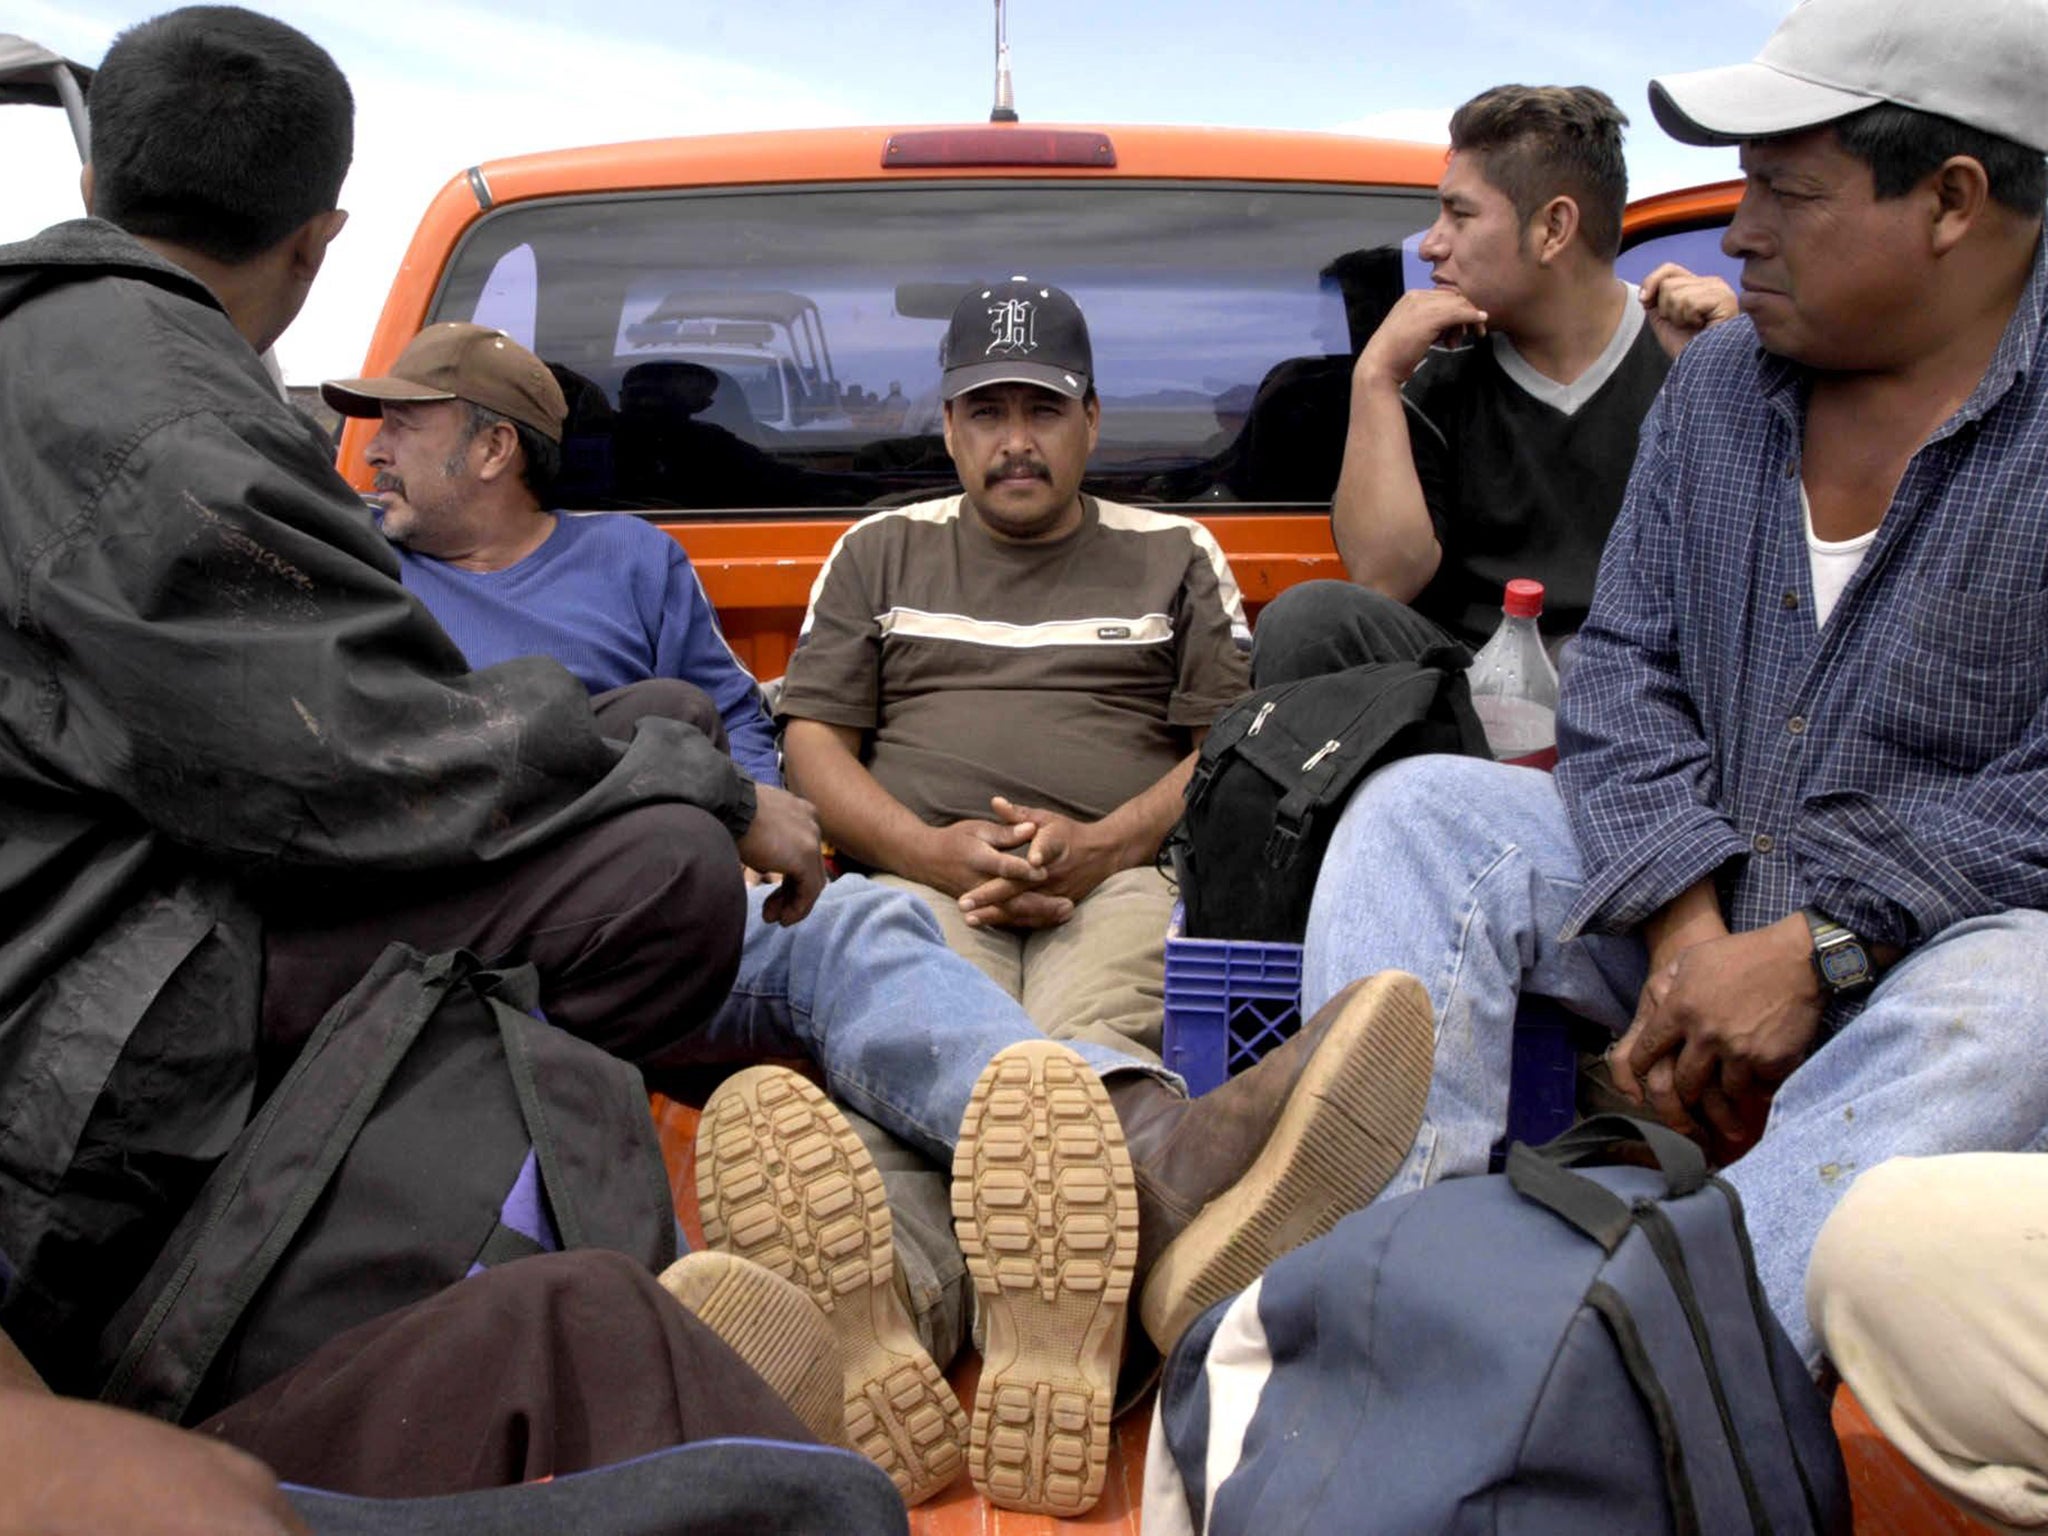 Migrants seeking to cross into the US wait in a pickup truck close to the US-Mexican border in Sonora, Mexico